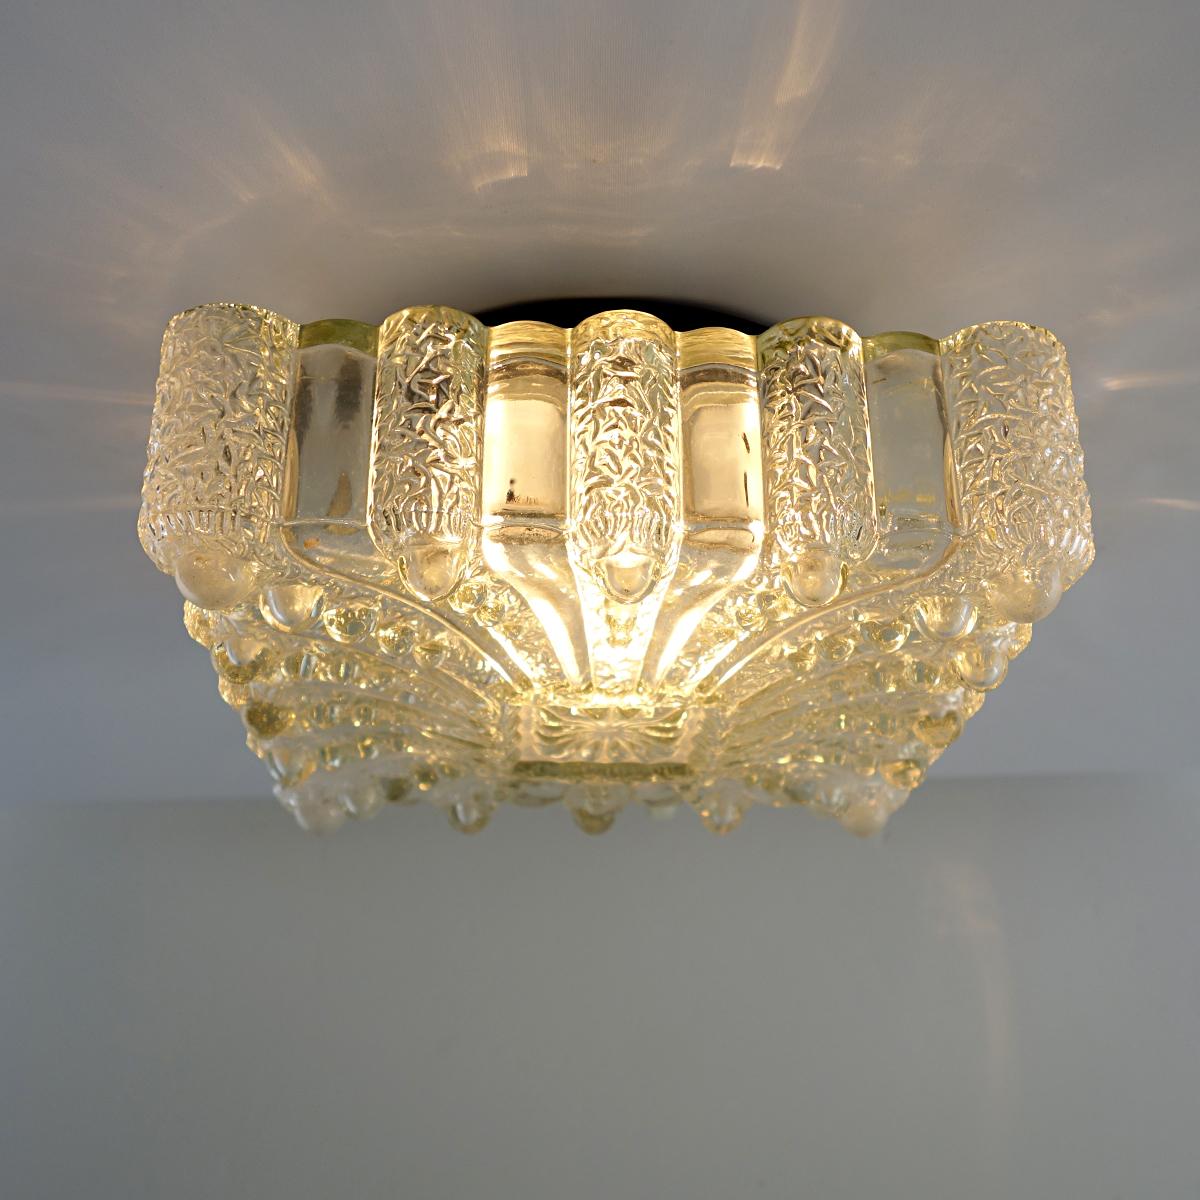 20th Century Hollywood Regency Square Glass Flushmount or Sconce by RZB Leuchten